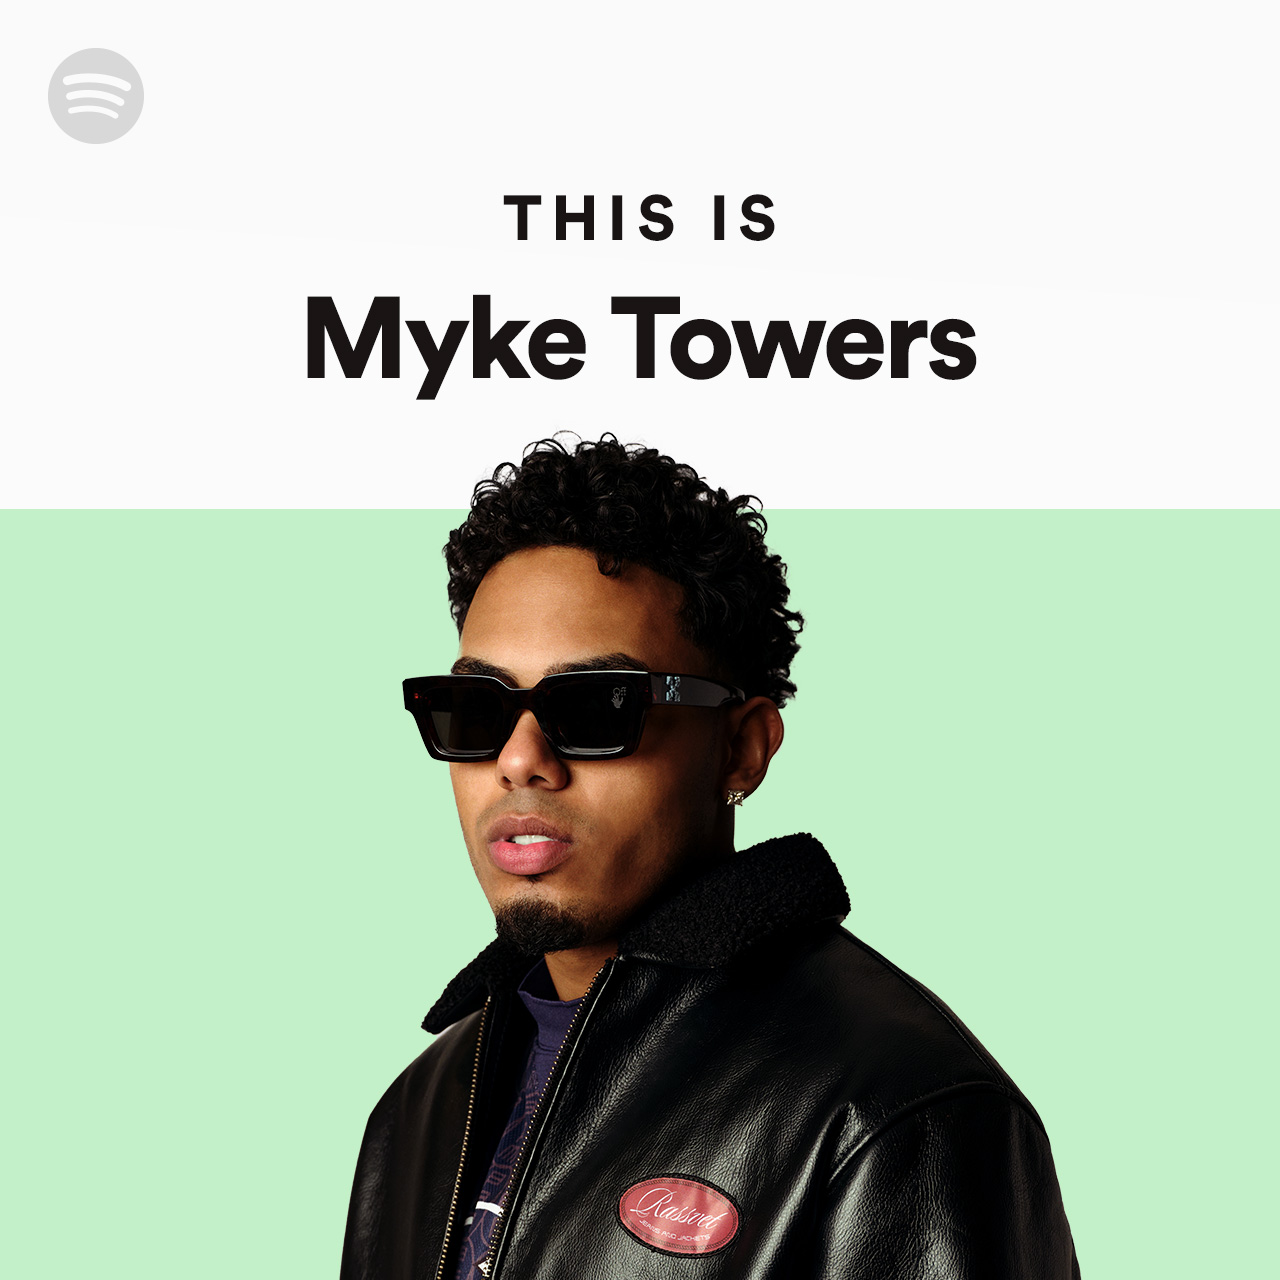 This Is Myke Towers